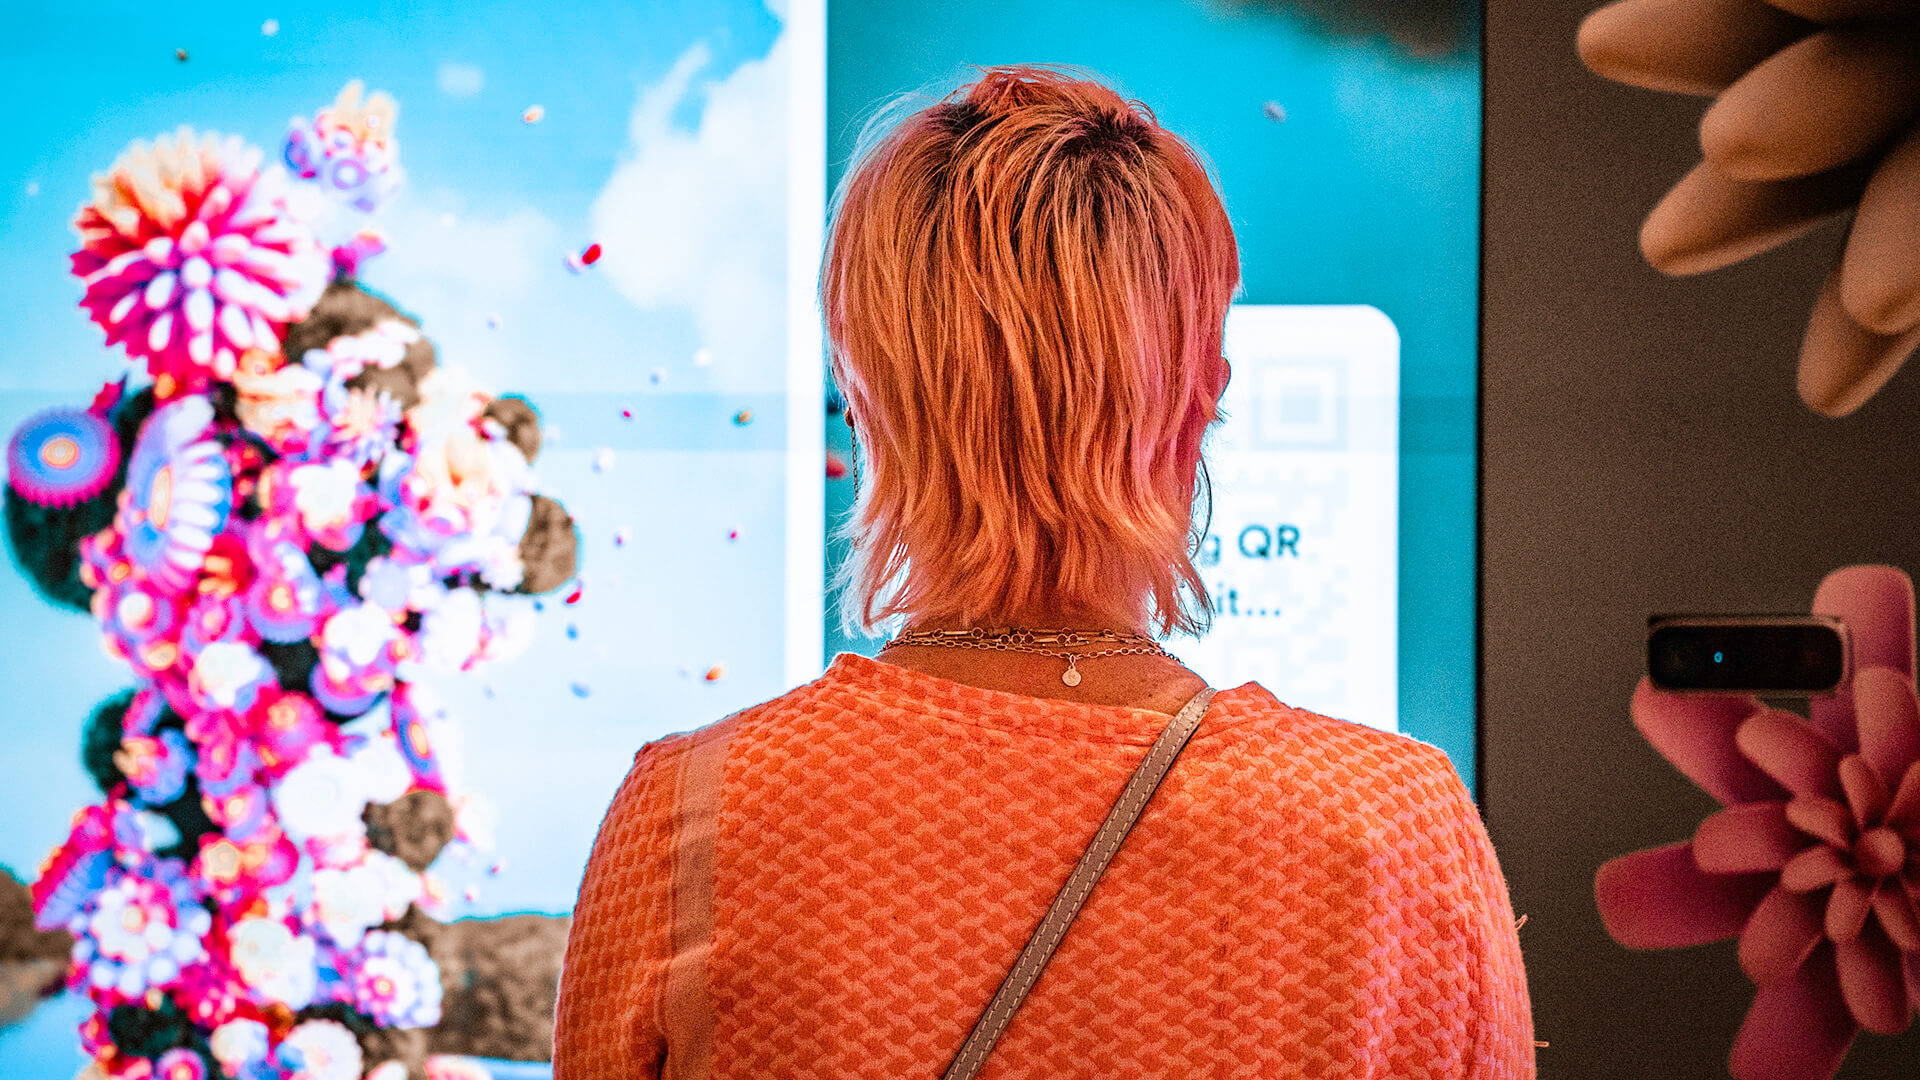 Shoppers interacting with the VANDAL Magic Mirror™ for the Macquarie Center 'Spring Into Action' Experiential campaign